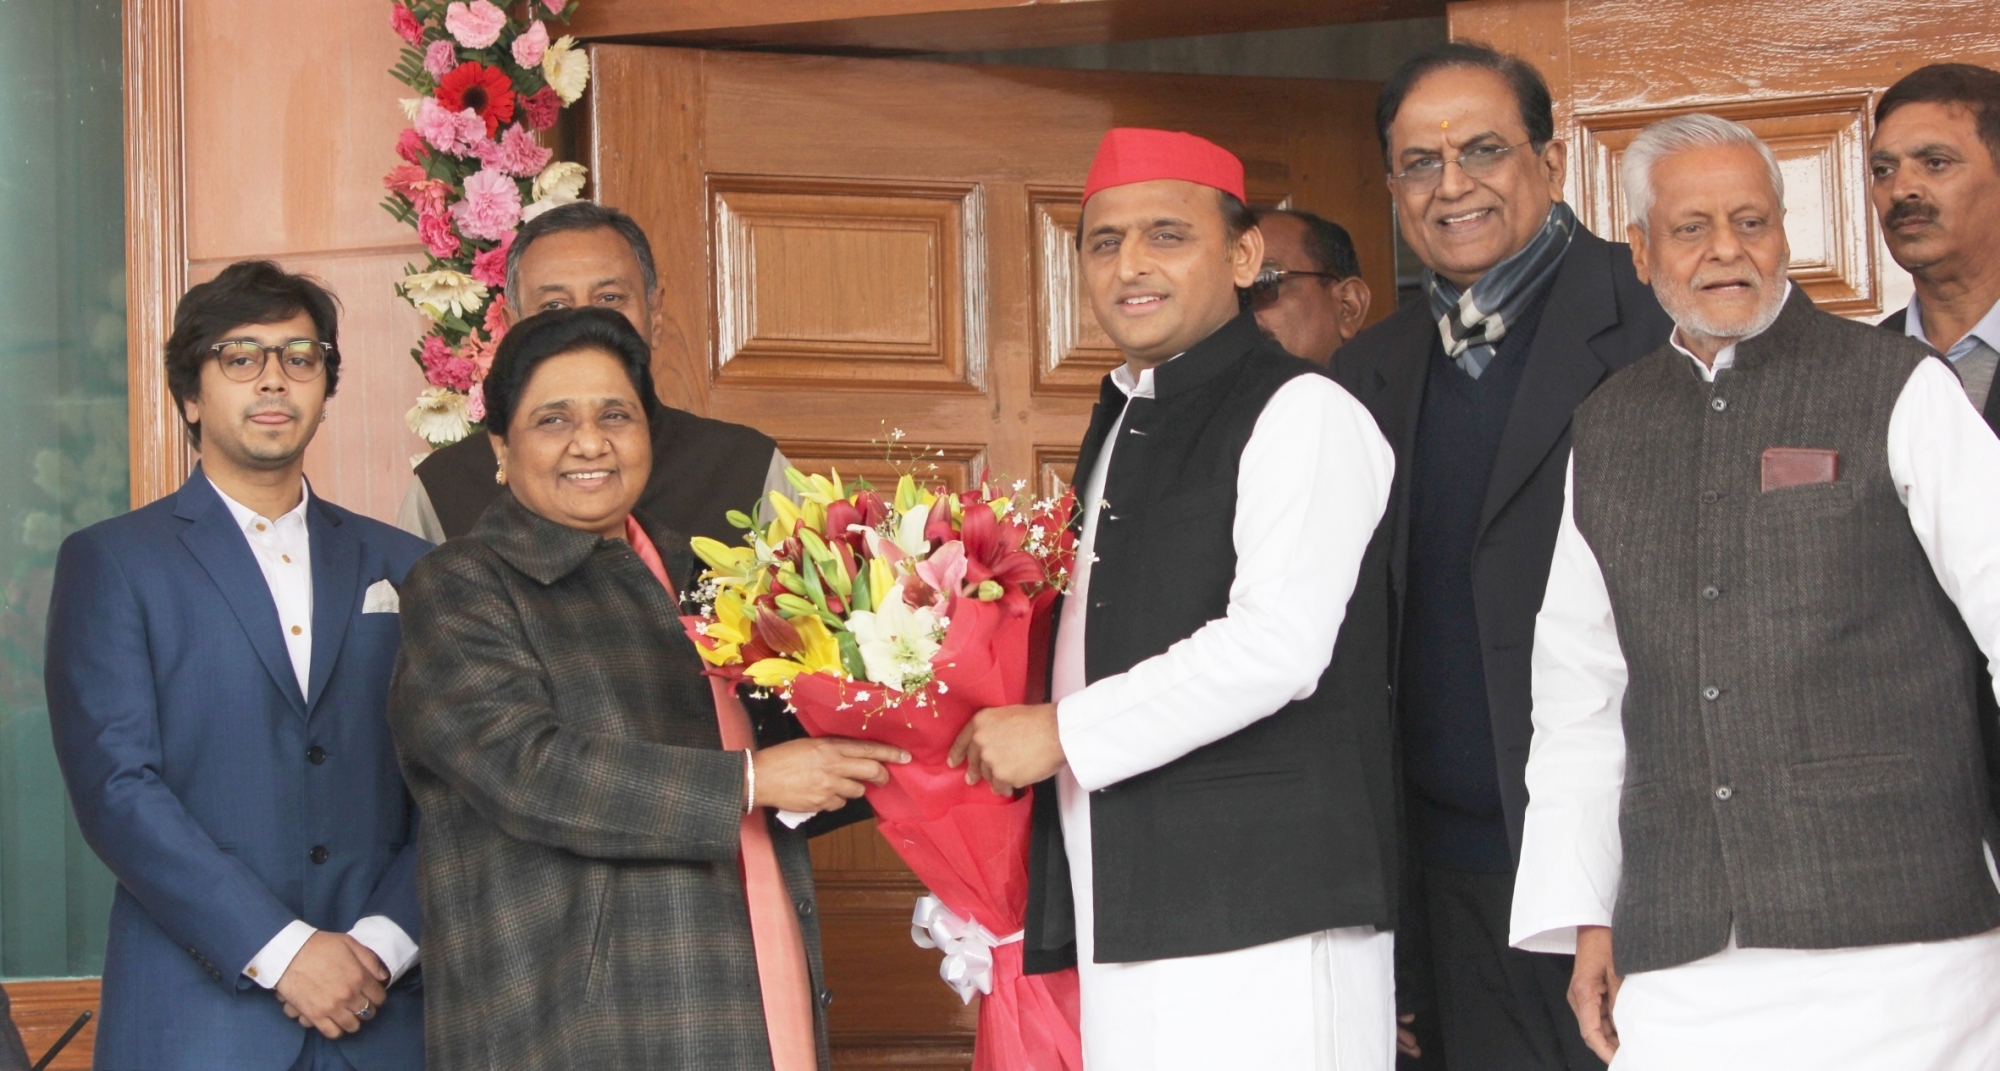 Akhilesh slams BJP's manifesto, says party failed to deliver earlier promises